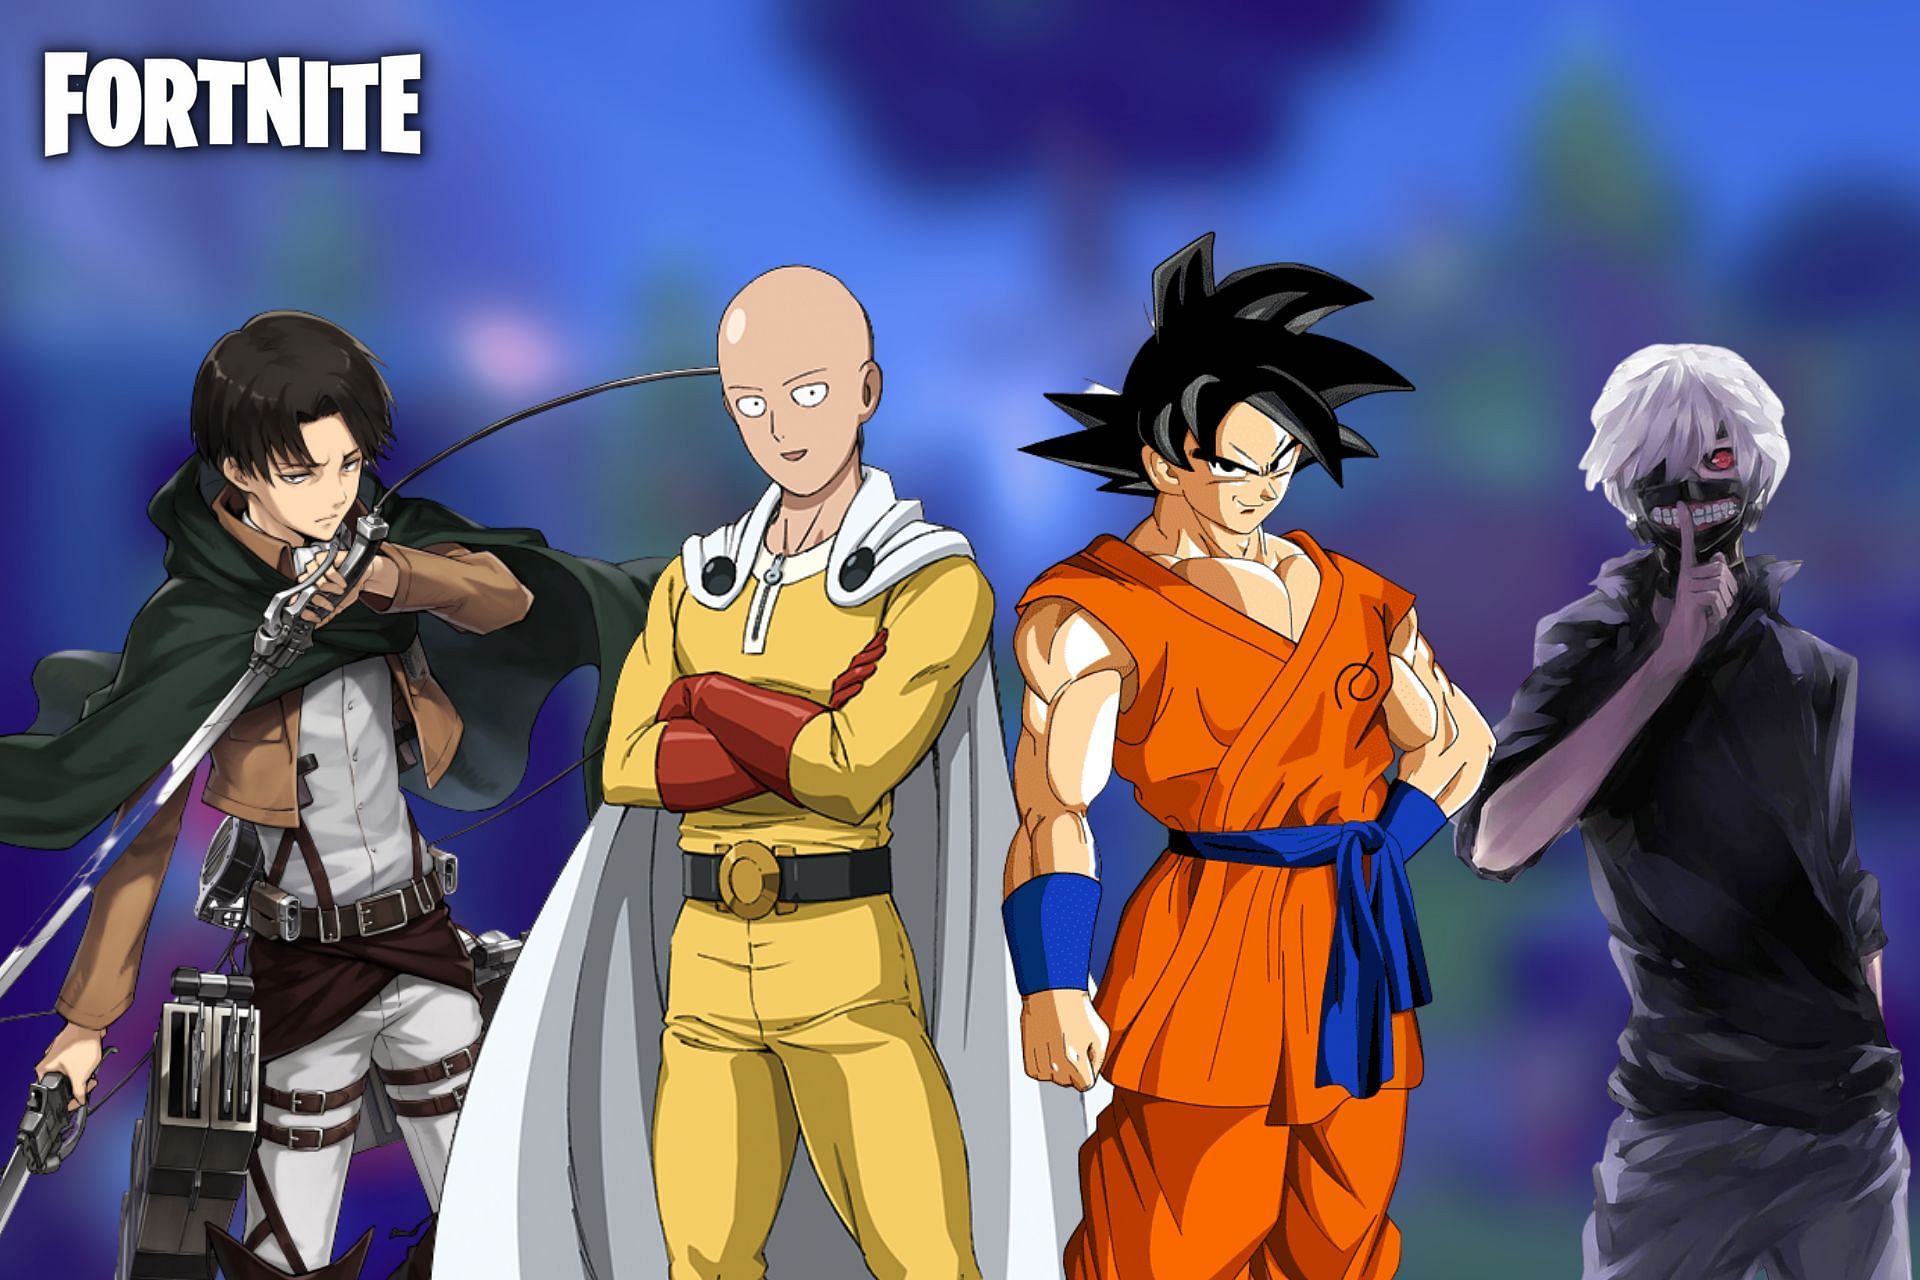 what if japan makes an anime collaboration. GT fam getting bigger and  bigger rn. : r/GuardianTales